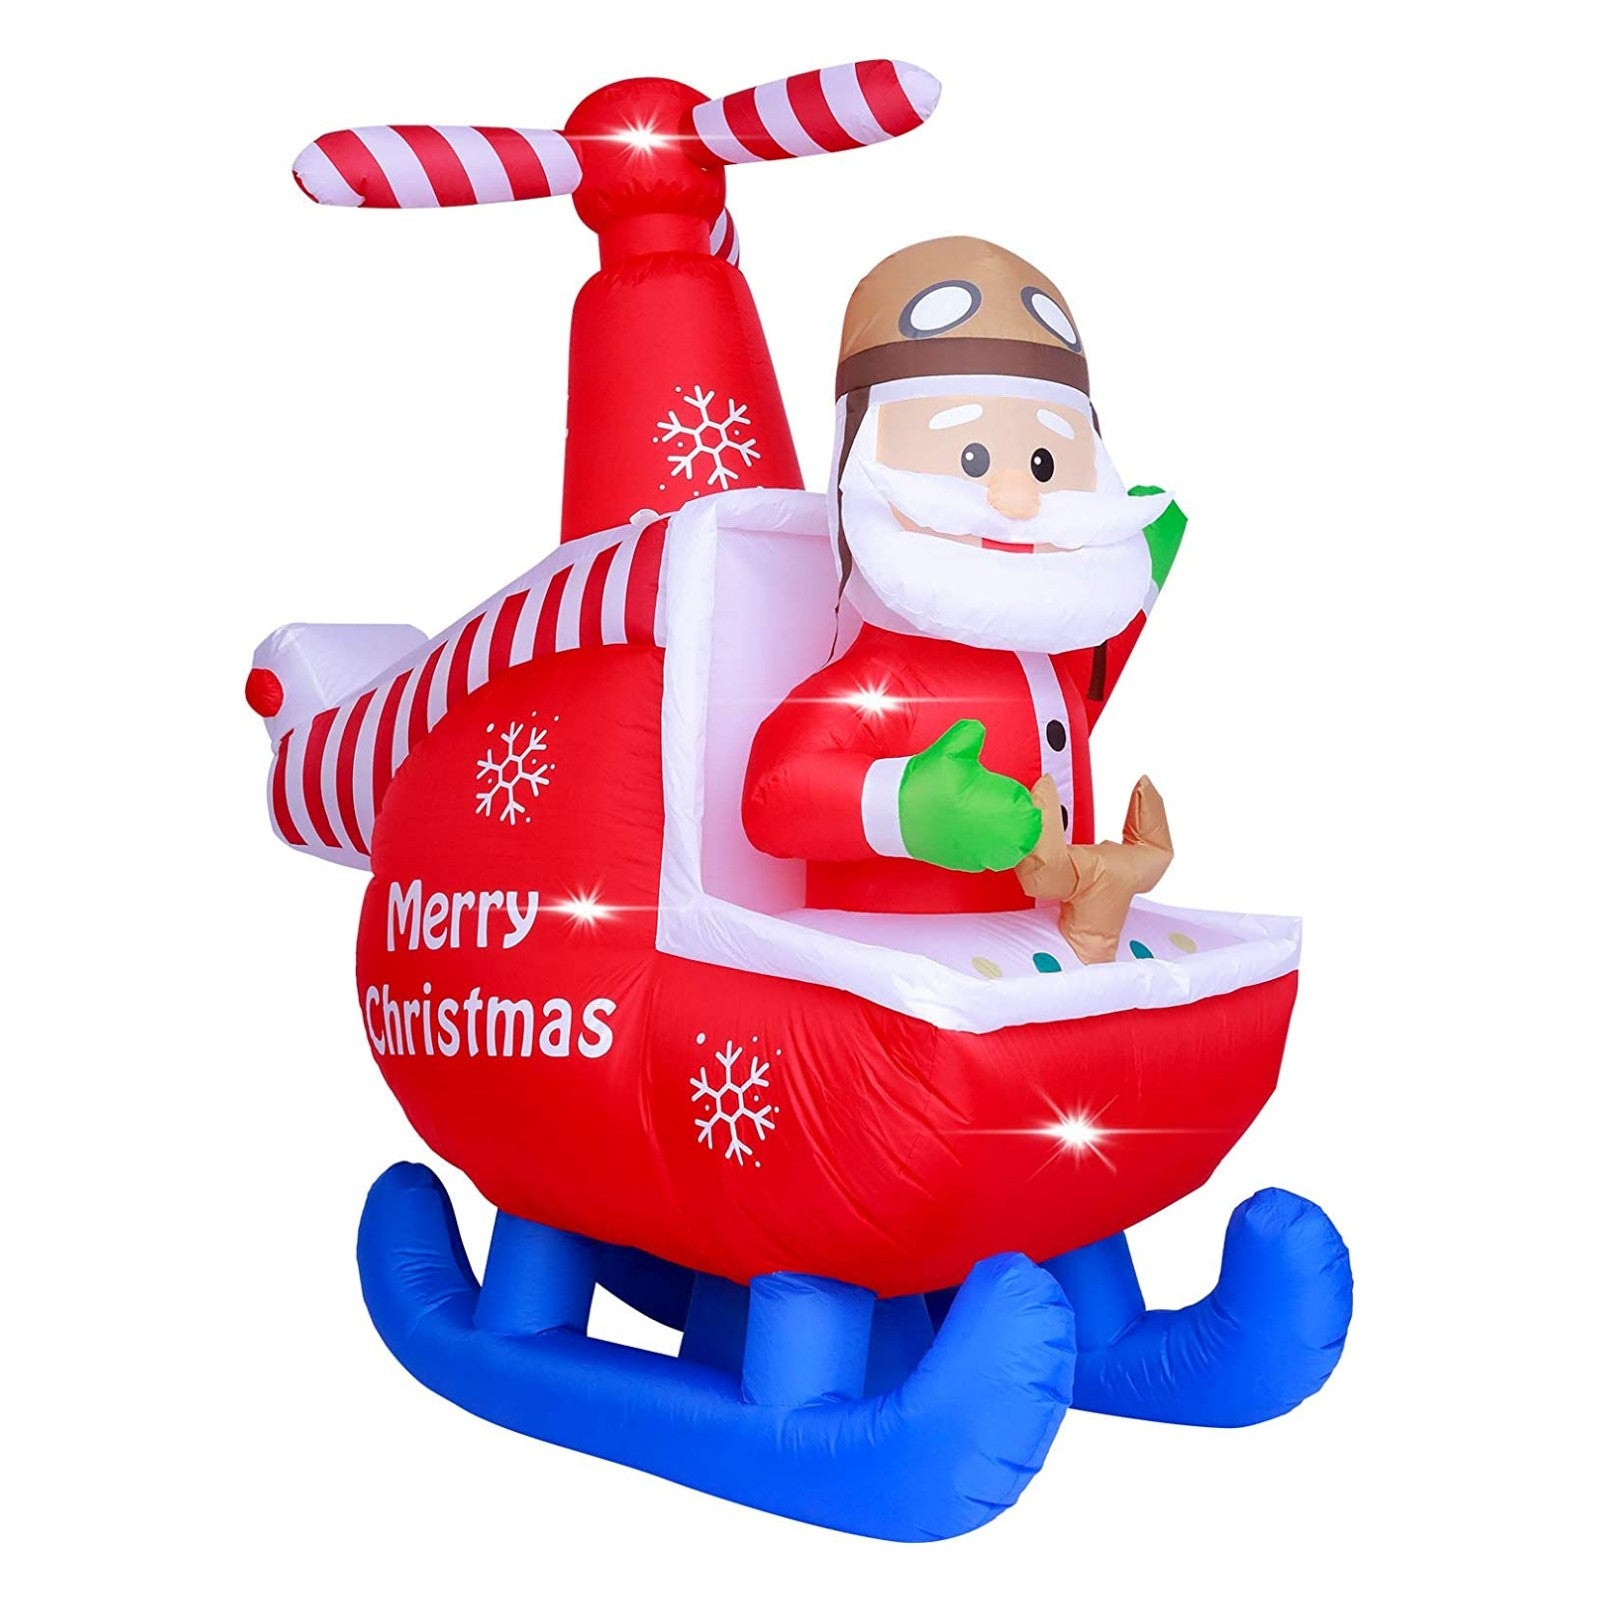 6ft Christmas Inflatable Decorations Claus Blow Up With LED Light For Holiday Season, Quick Air Blown, Christmas Inflatable, Christmas Inflatable Decoration, Holiday Season Inflatable, Christmas inflatables, Christmas inflatables on Sale, Christmas inflatables 2022, Christmas inflatables lowes, Christmas inflatables wholesale, 